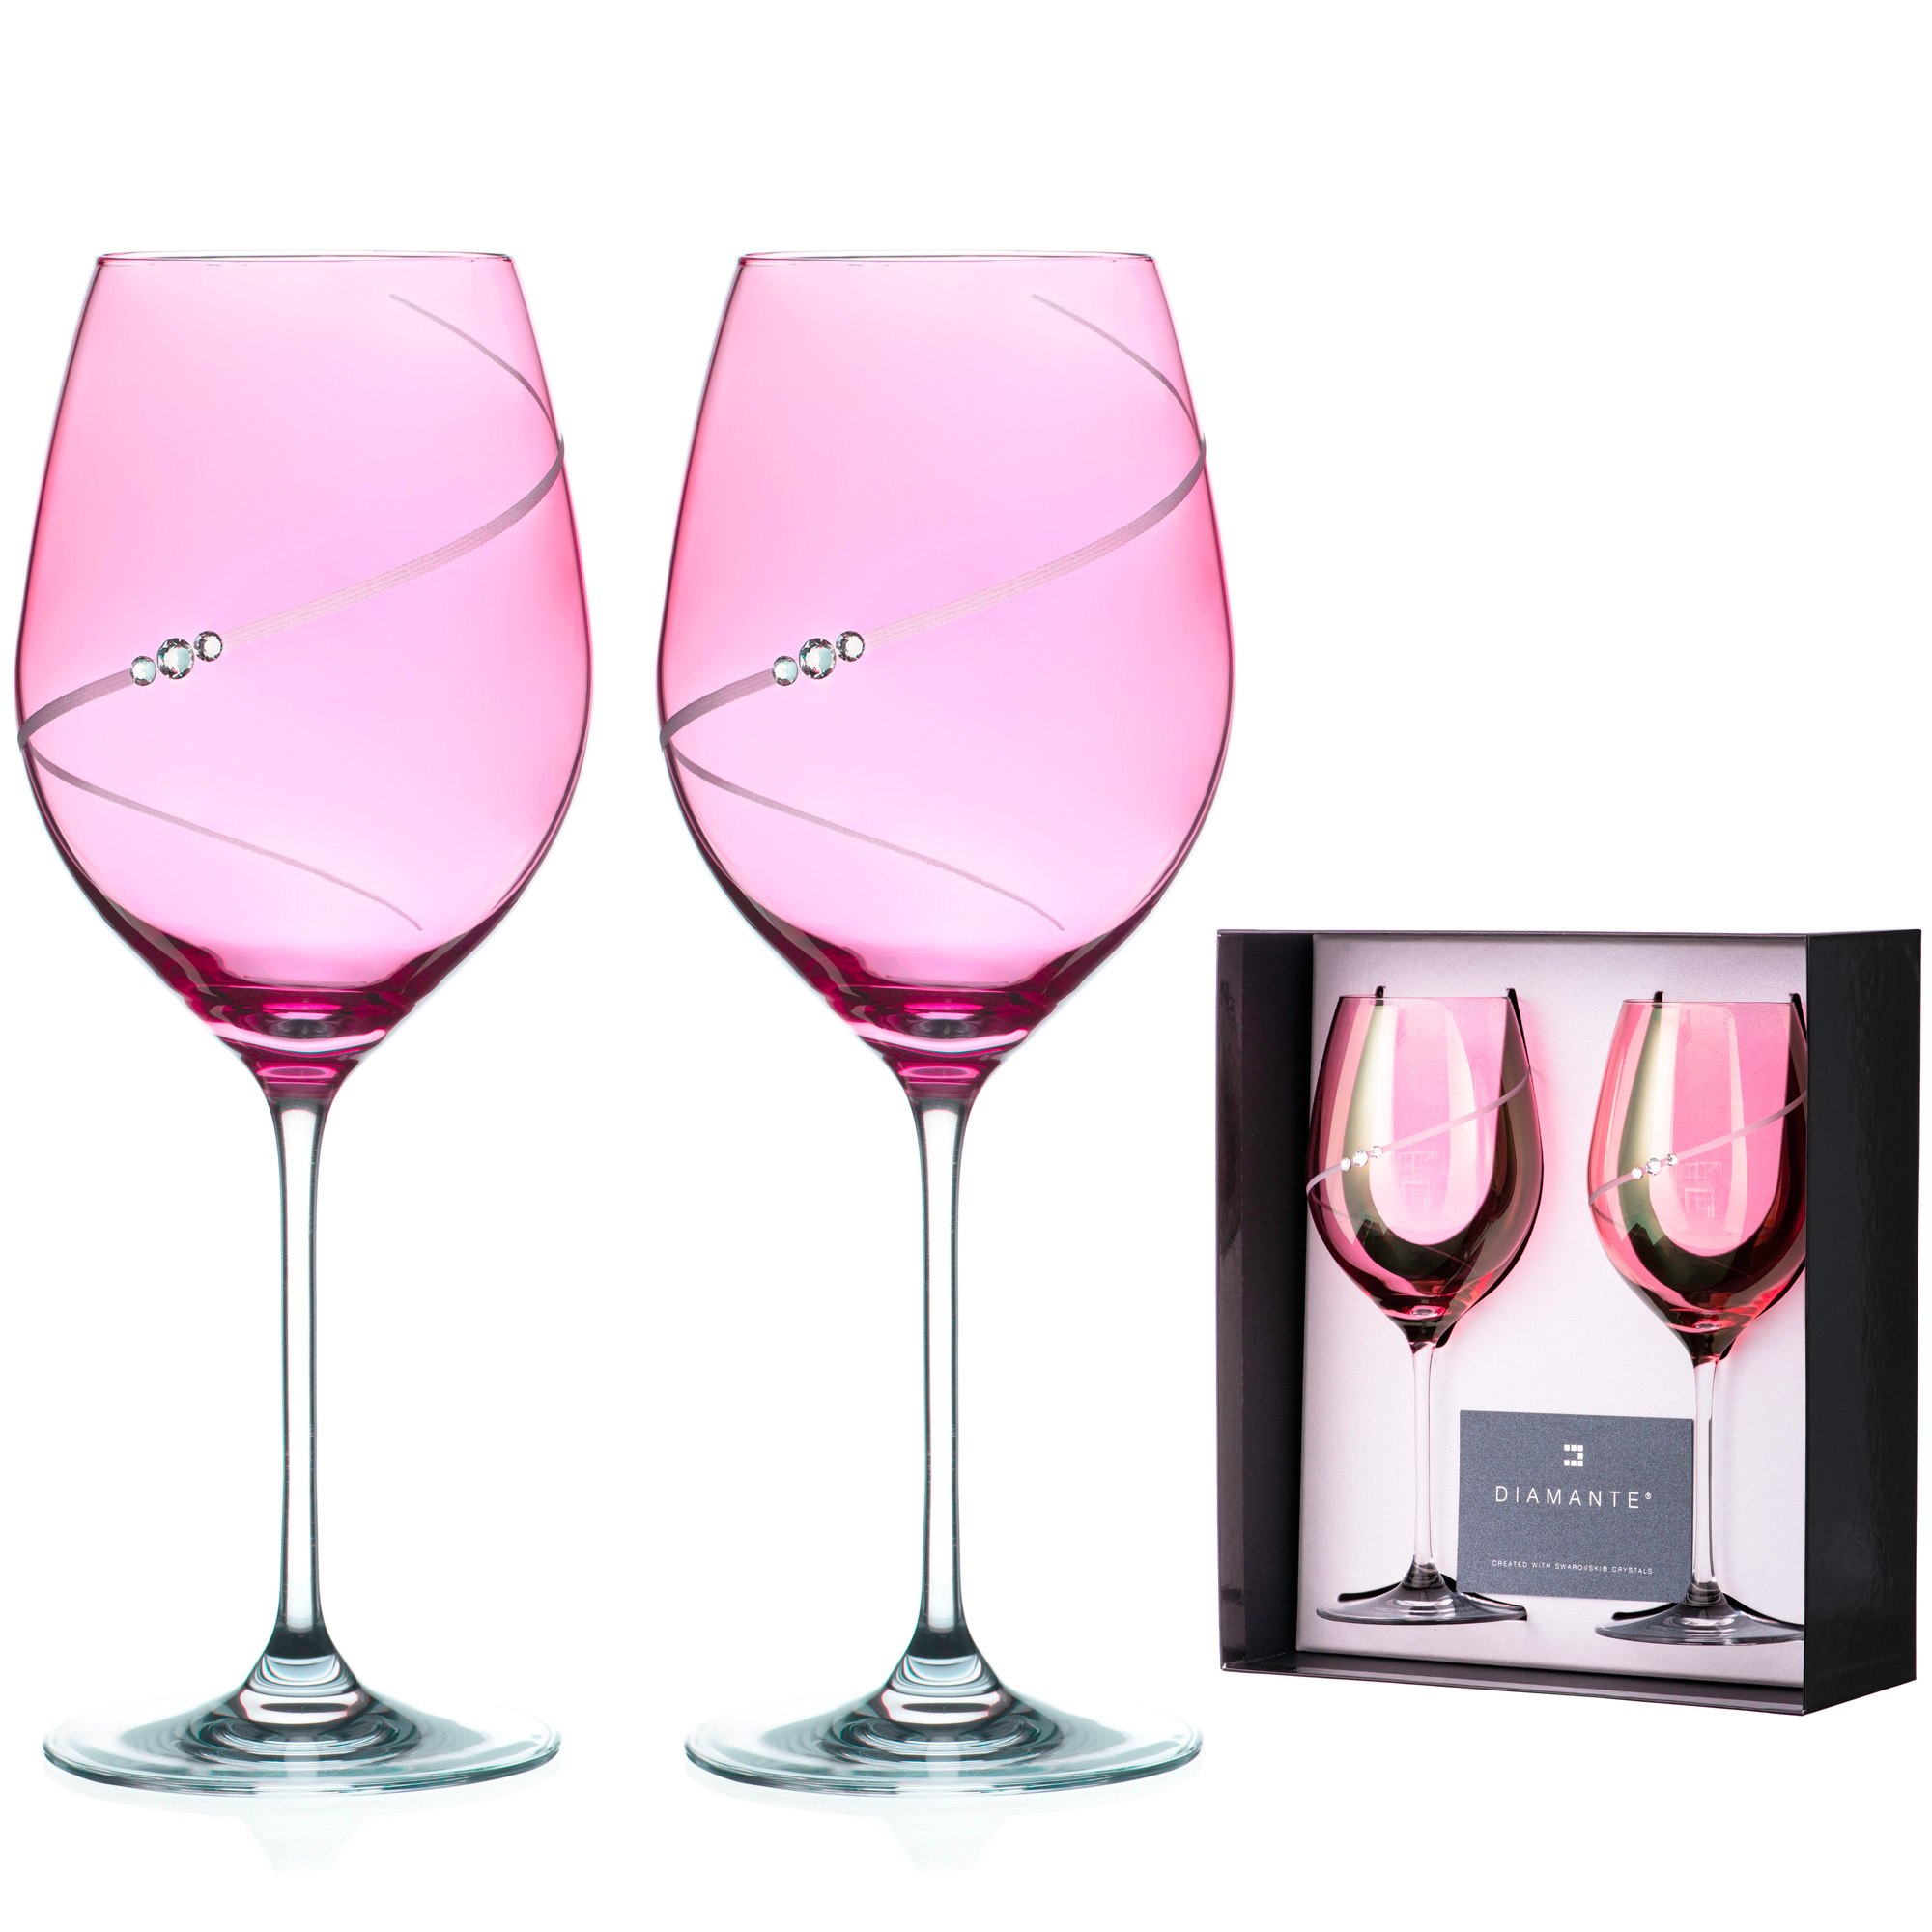 Silhouette' Crystal White Wine Glasses with Swarovski Crystals - Set of 2